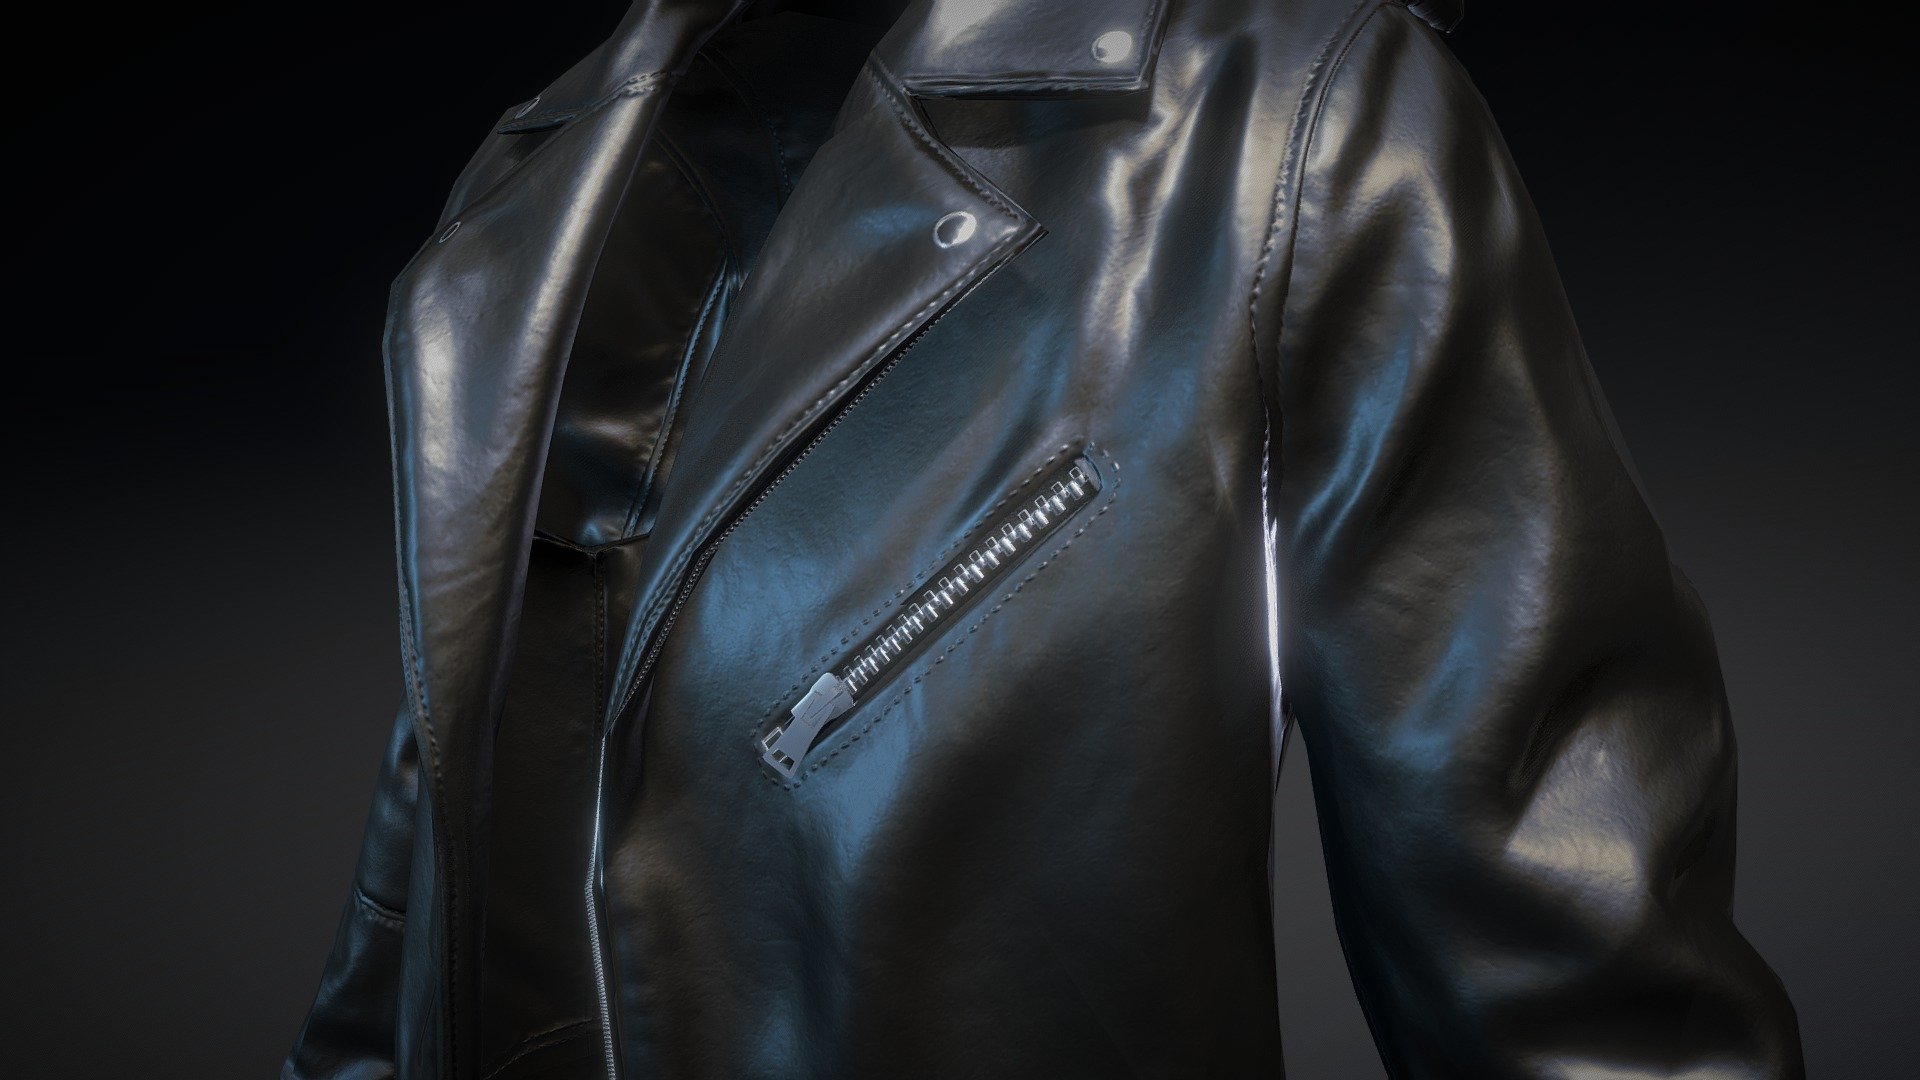 This is the leather jacket created for game ready model with the tricount of approx 8k. if you find this helpfull for your project feel free to get it 3d model